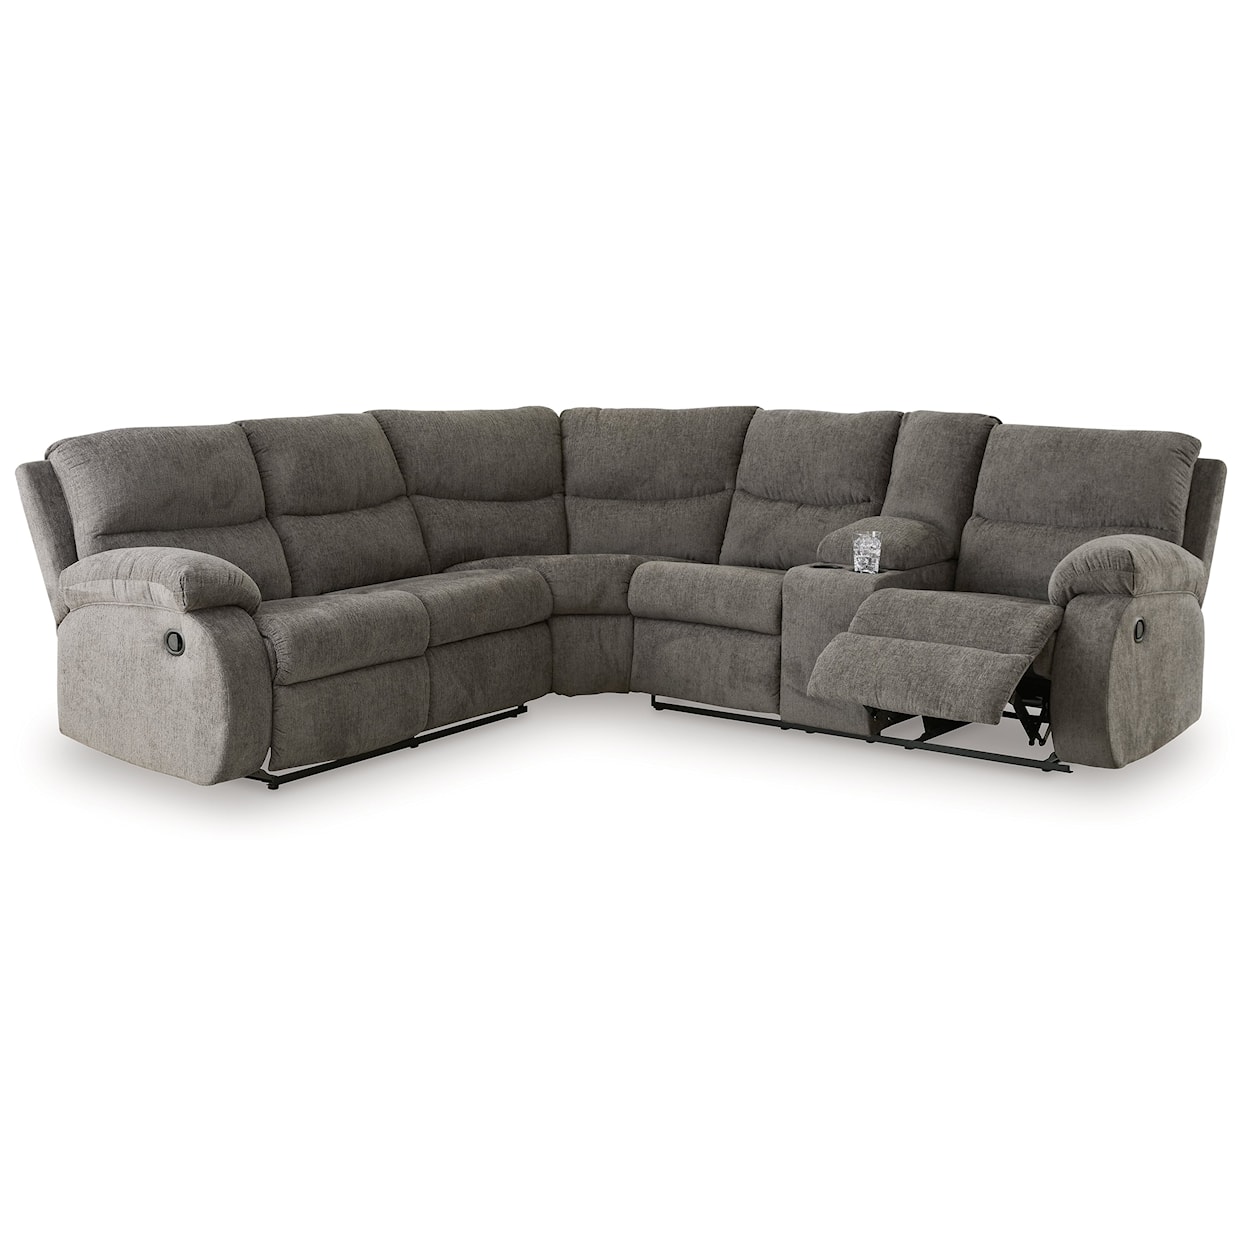 Signature Museum Reclining Sectional